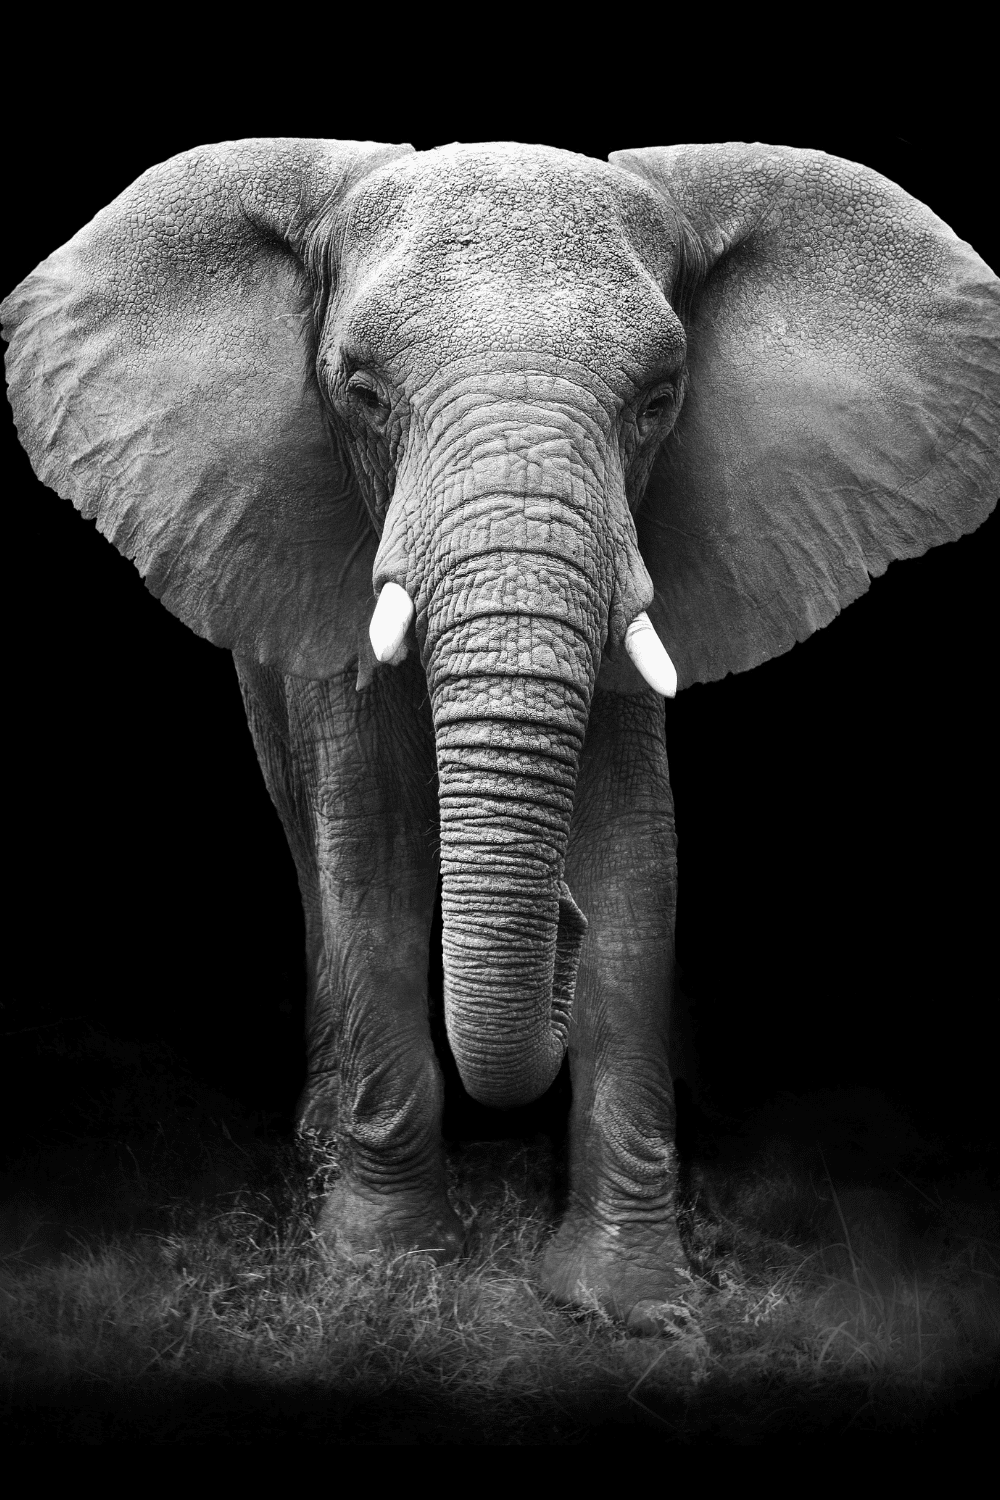 A grey elephant surrounded by a black background